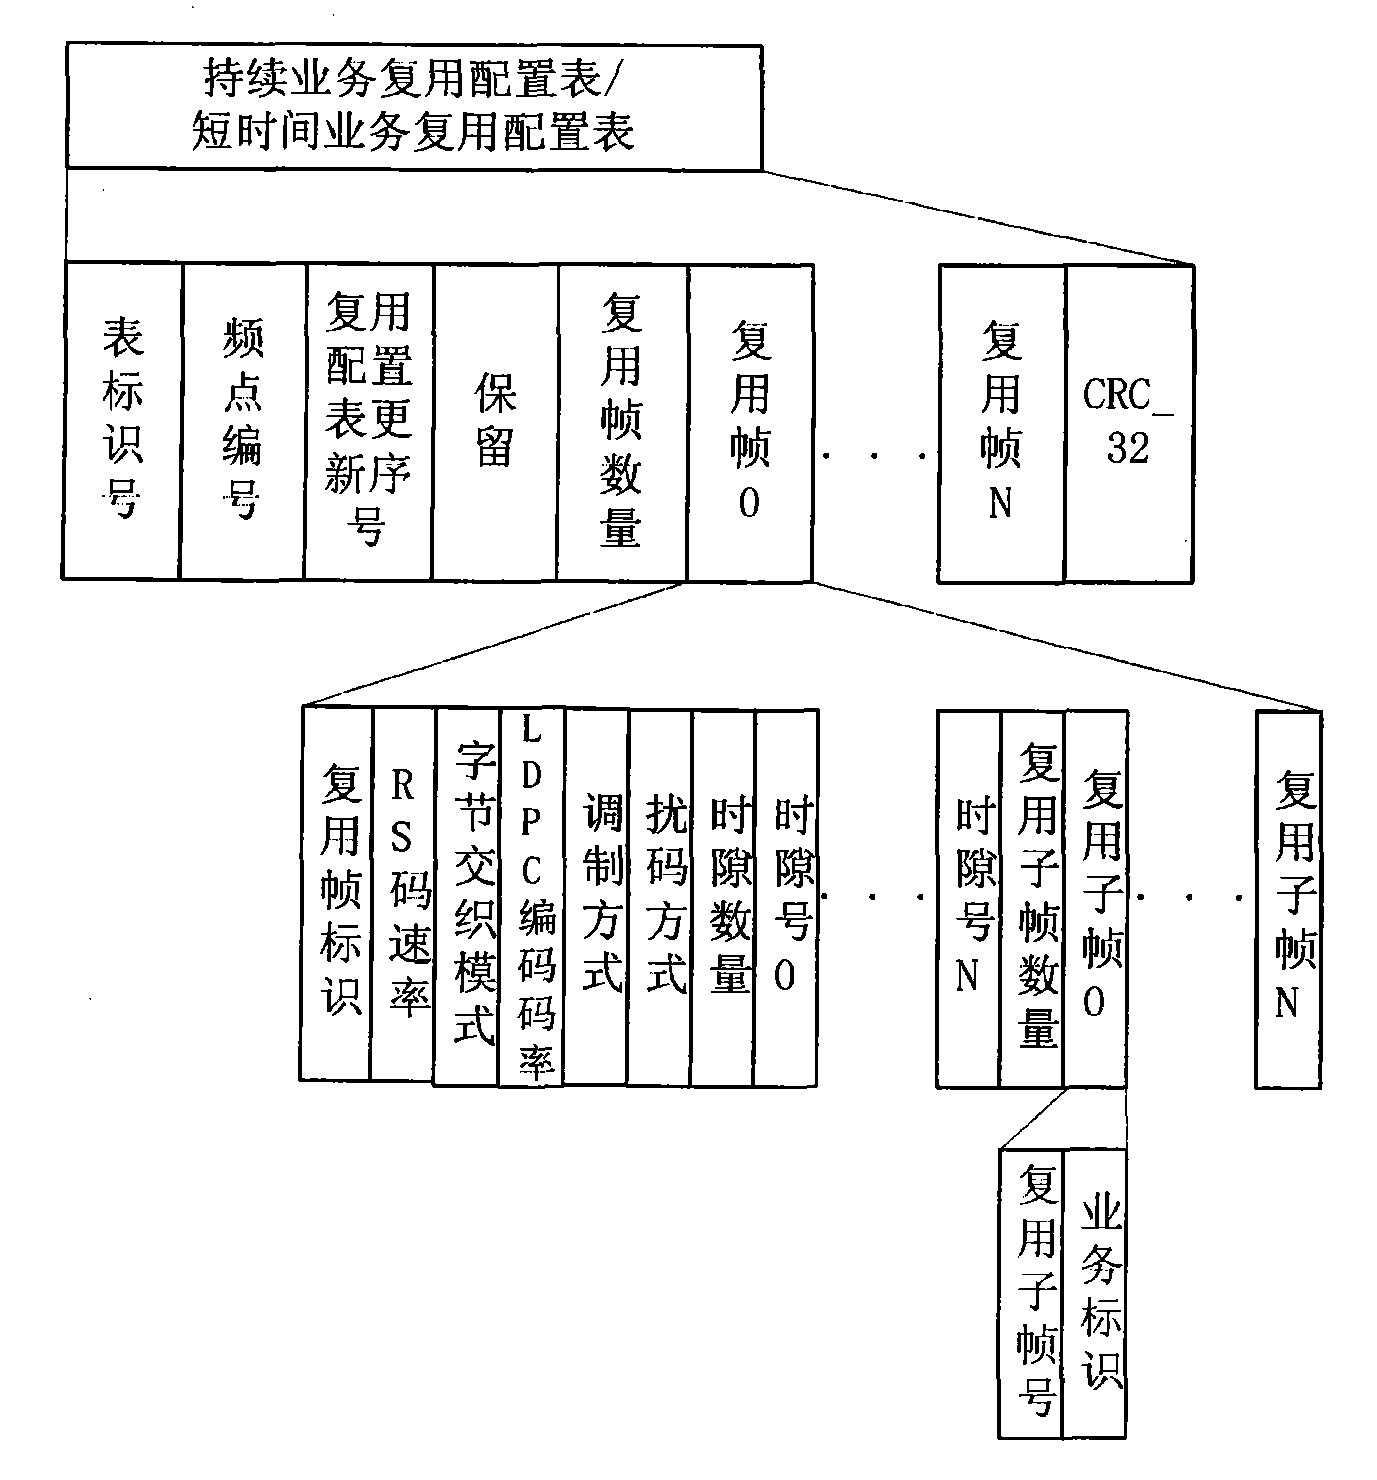 Method and terminal for generating and applying electronic business guiding information